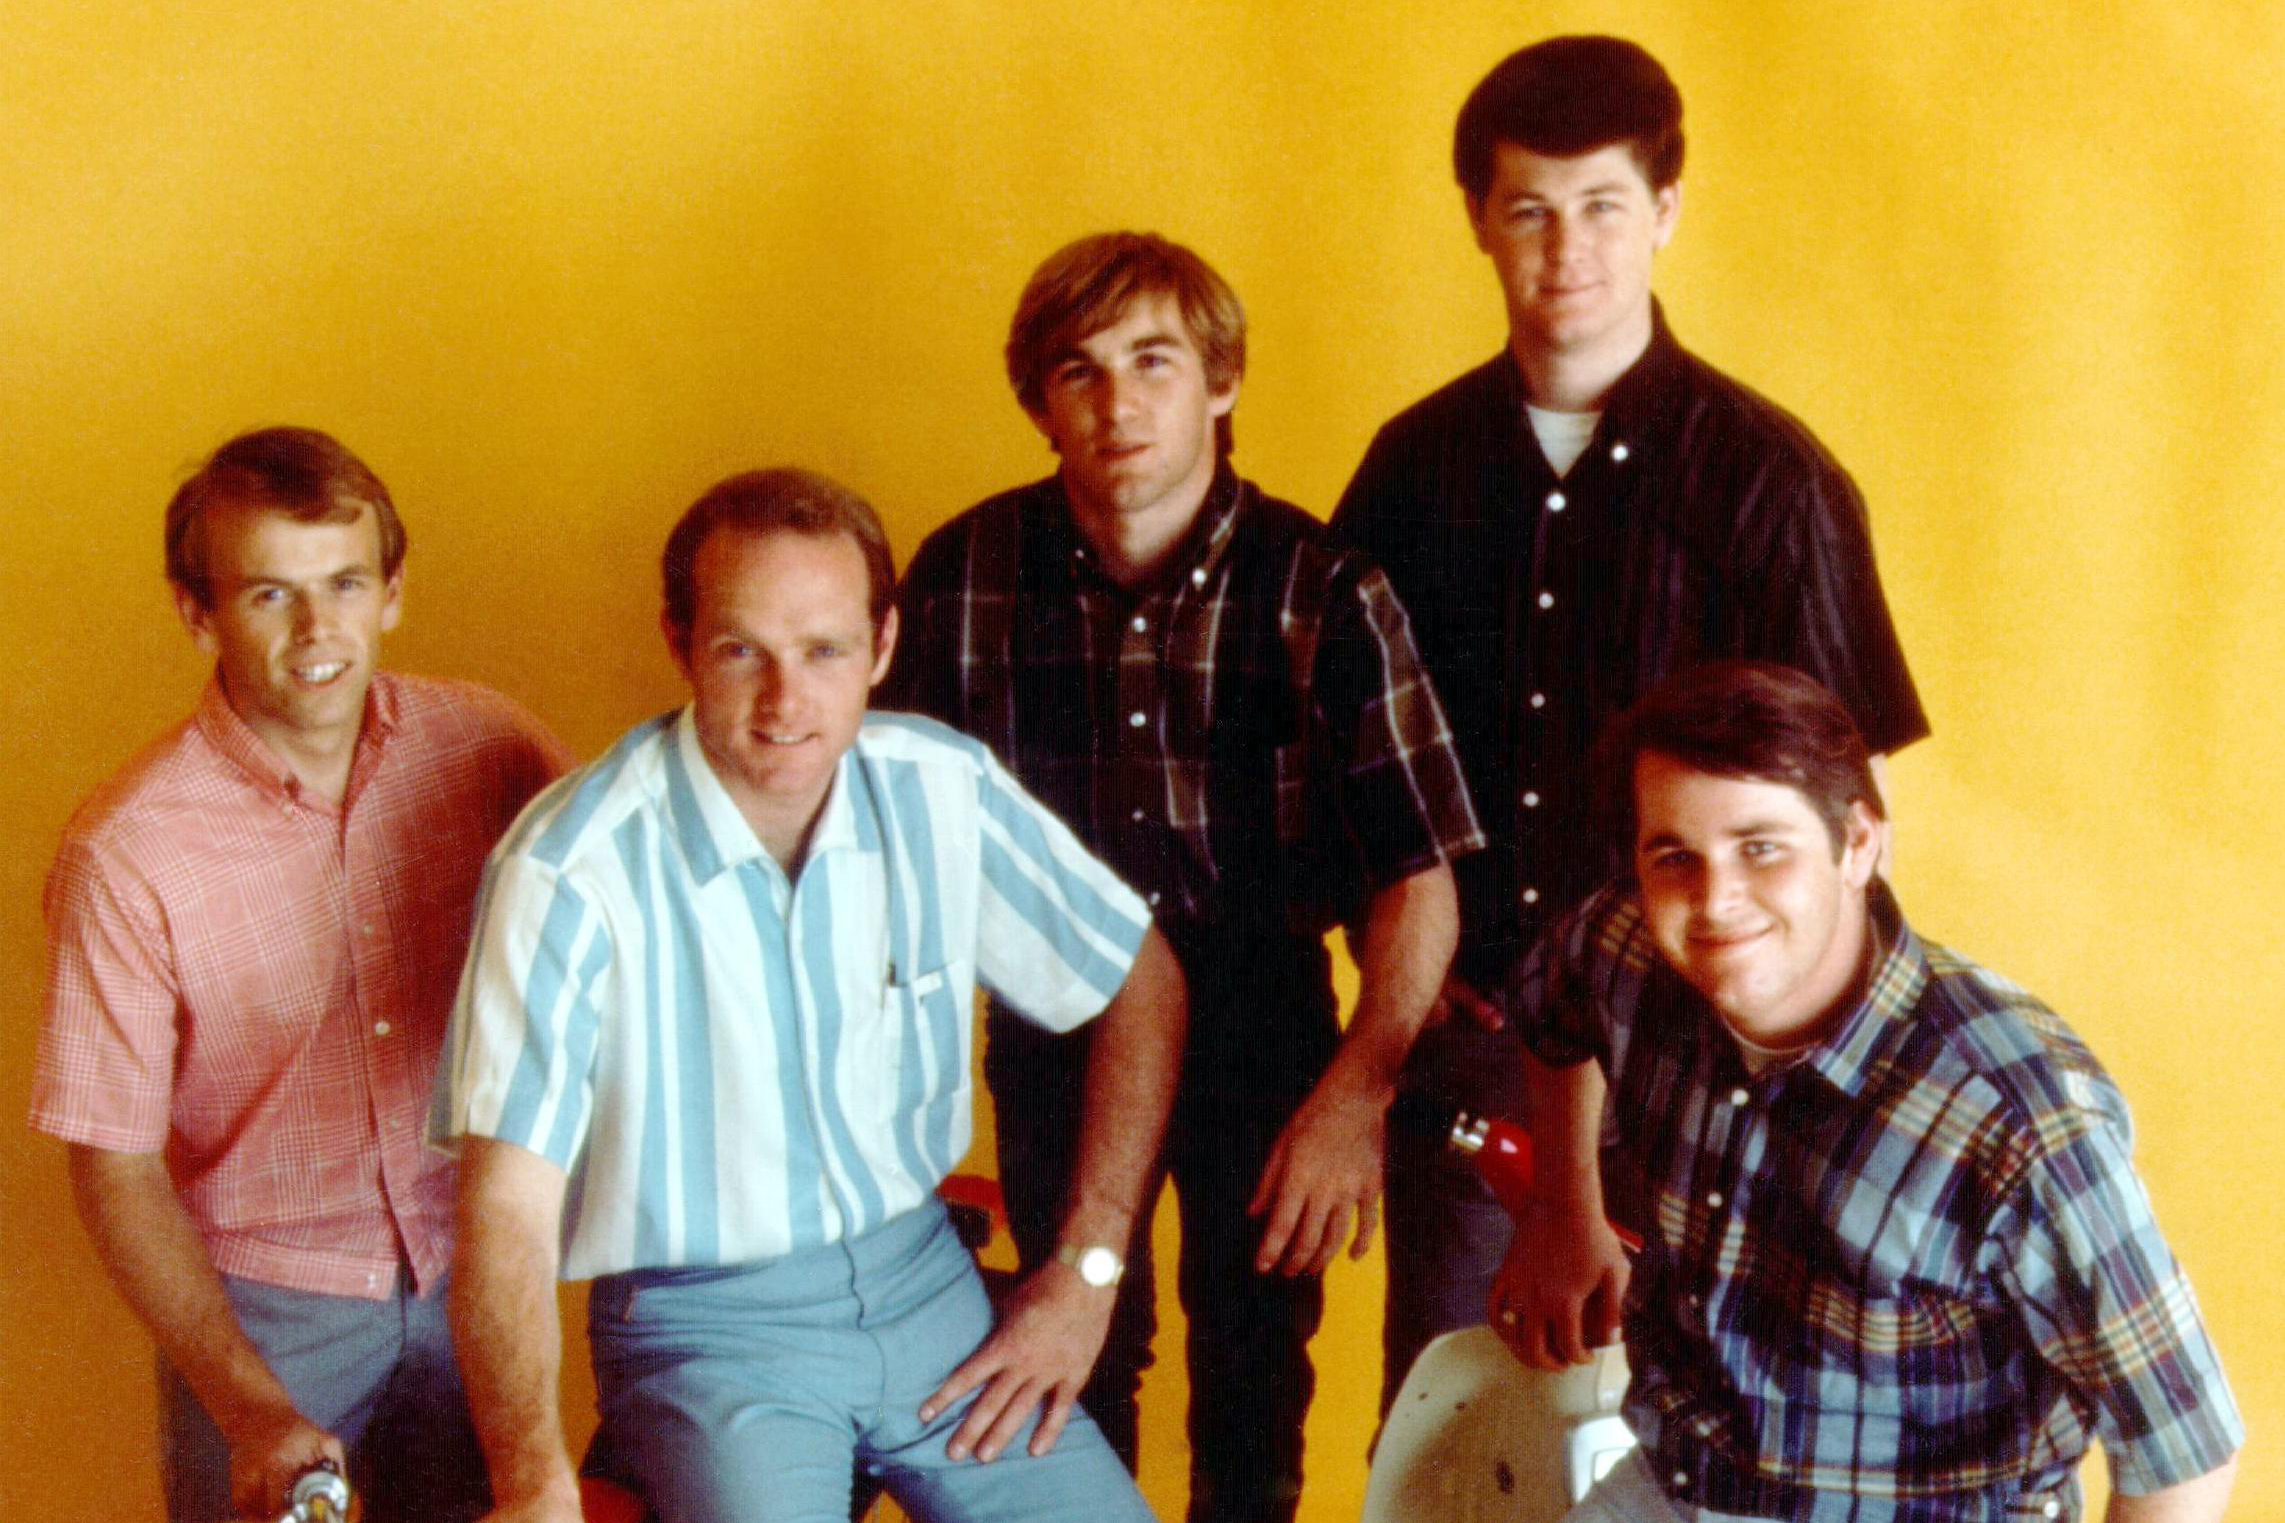 Stream It Or Skip It: ‘The Beach Boys’ on Disney+, A Reverent Look Back At A Band Whose “Good Vibrations” Just Couldn’t Last